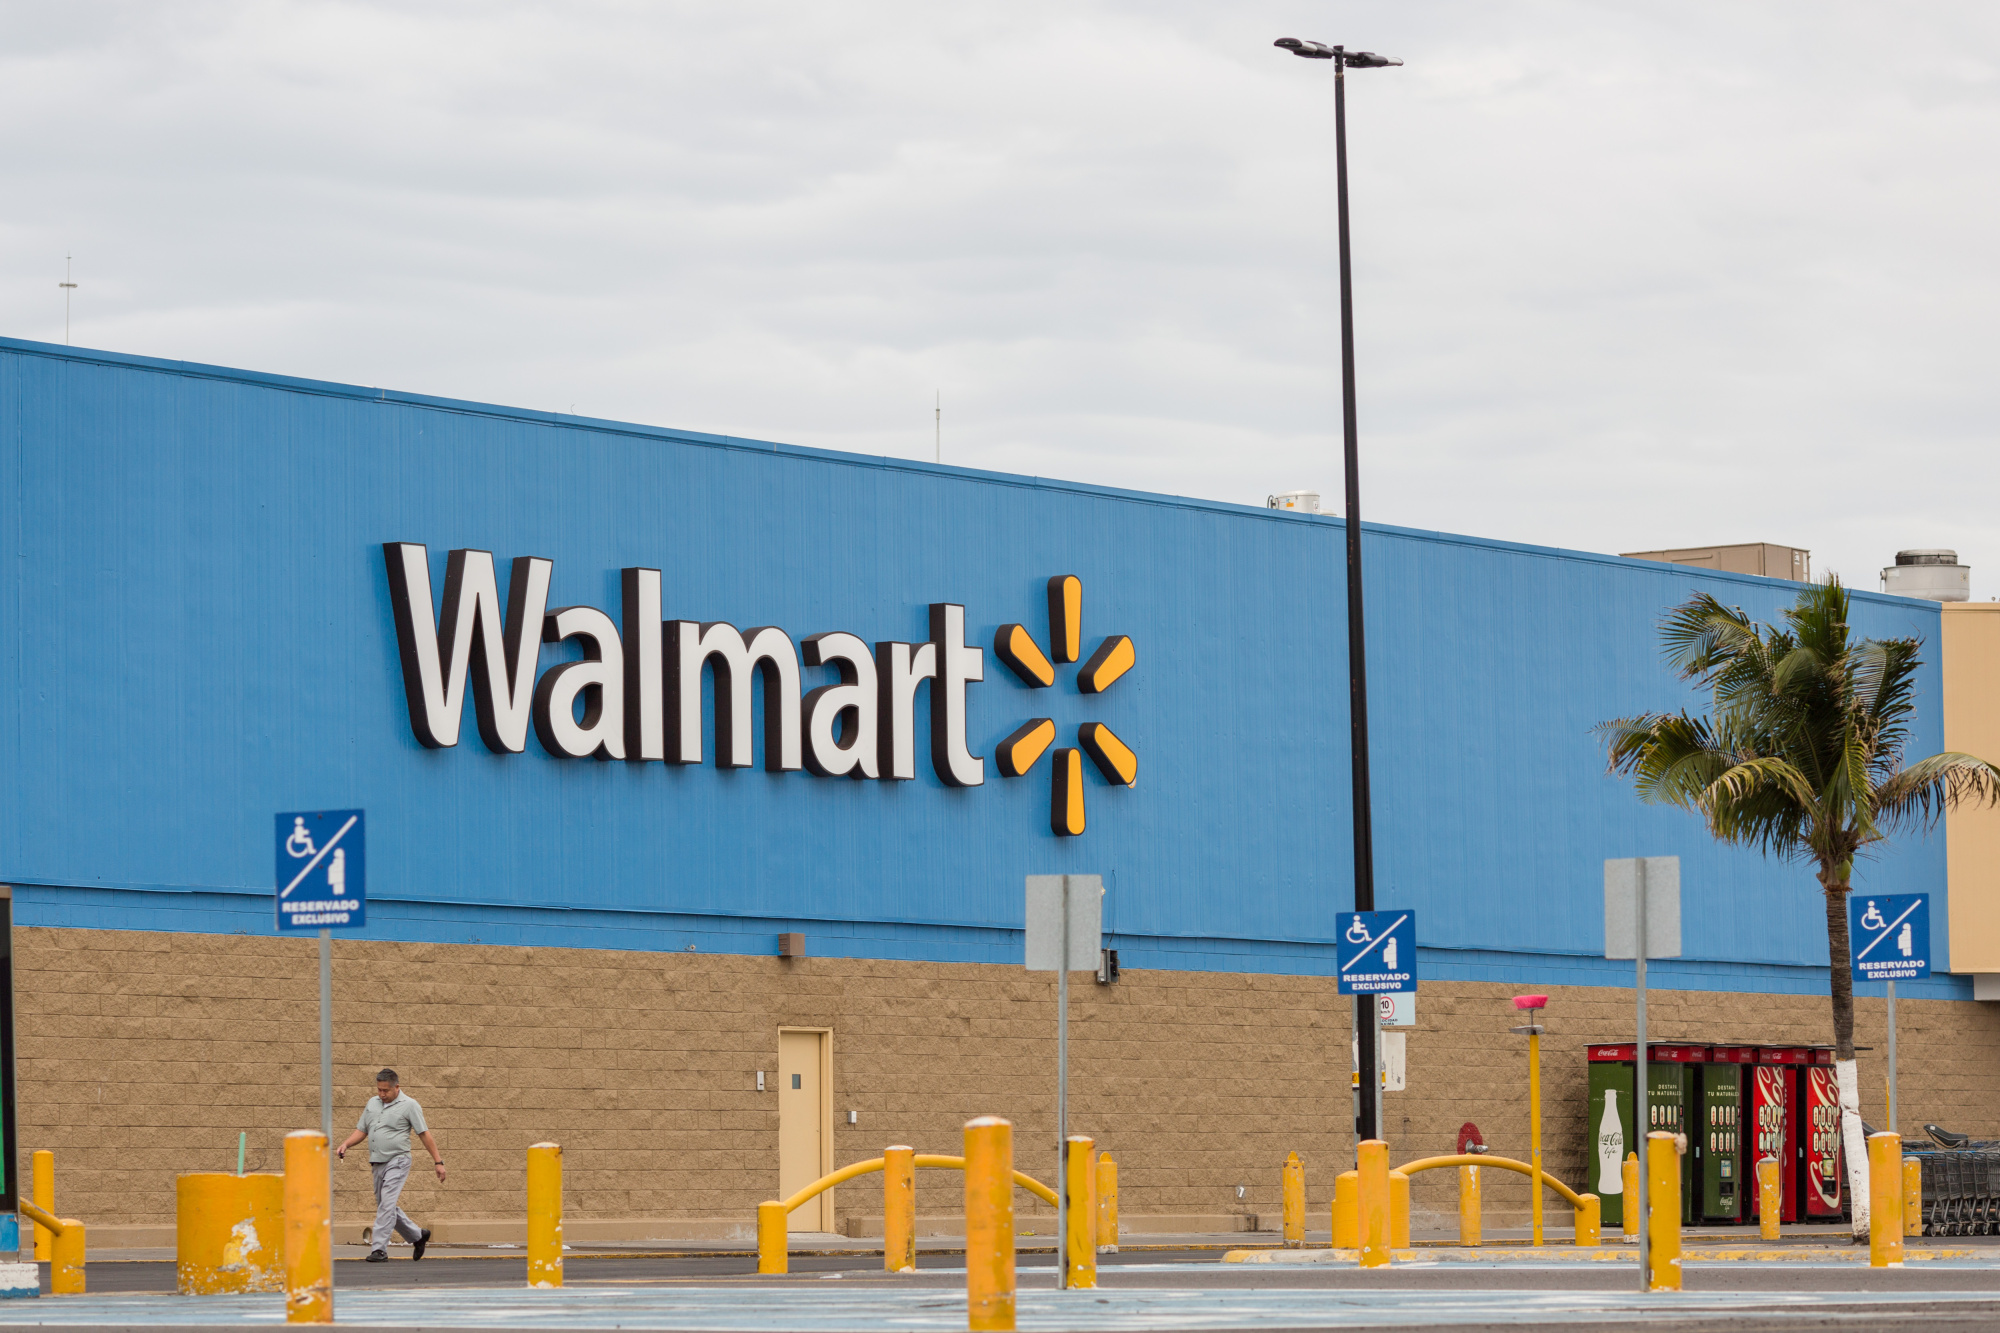 Walmart Pulls Away From Brazil. Although Walmart is currently the